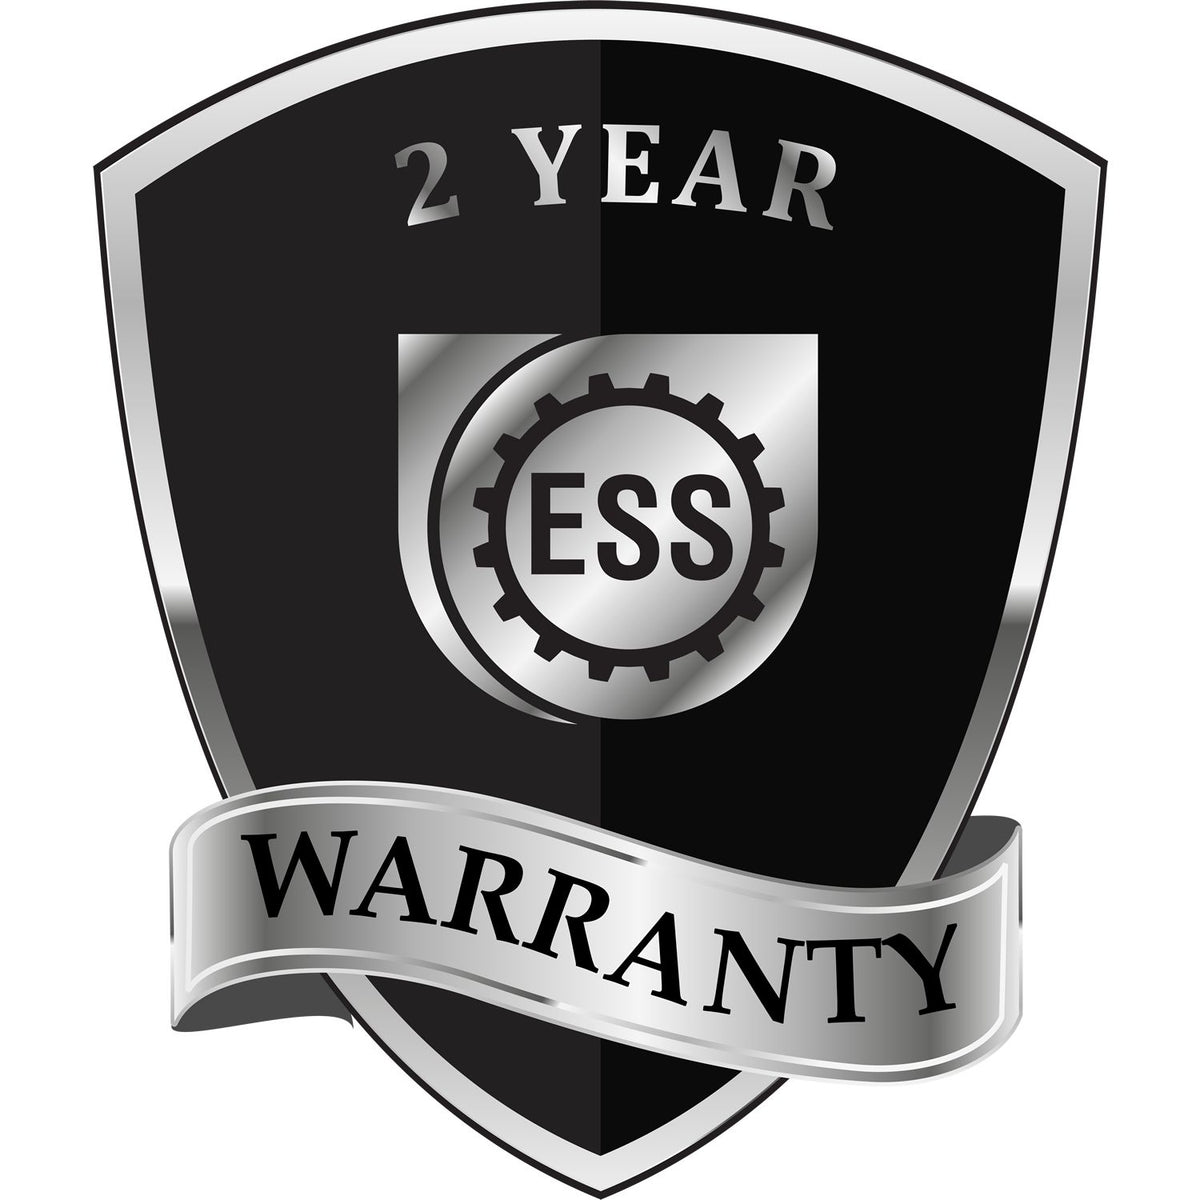 A badge or emblem showing a warranty icon for the Florida Engineer Desk Seal